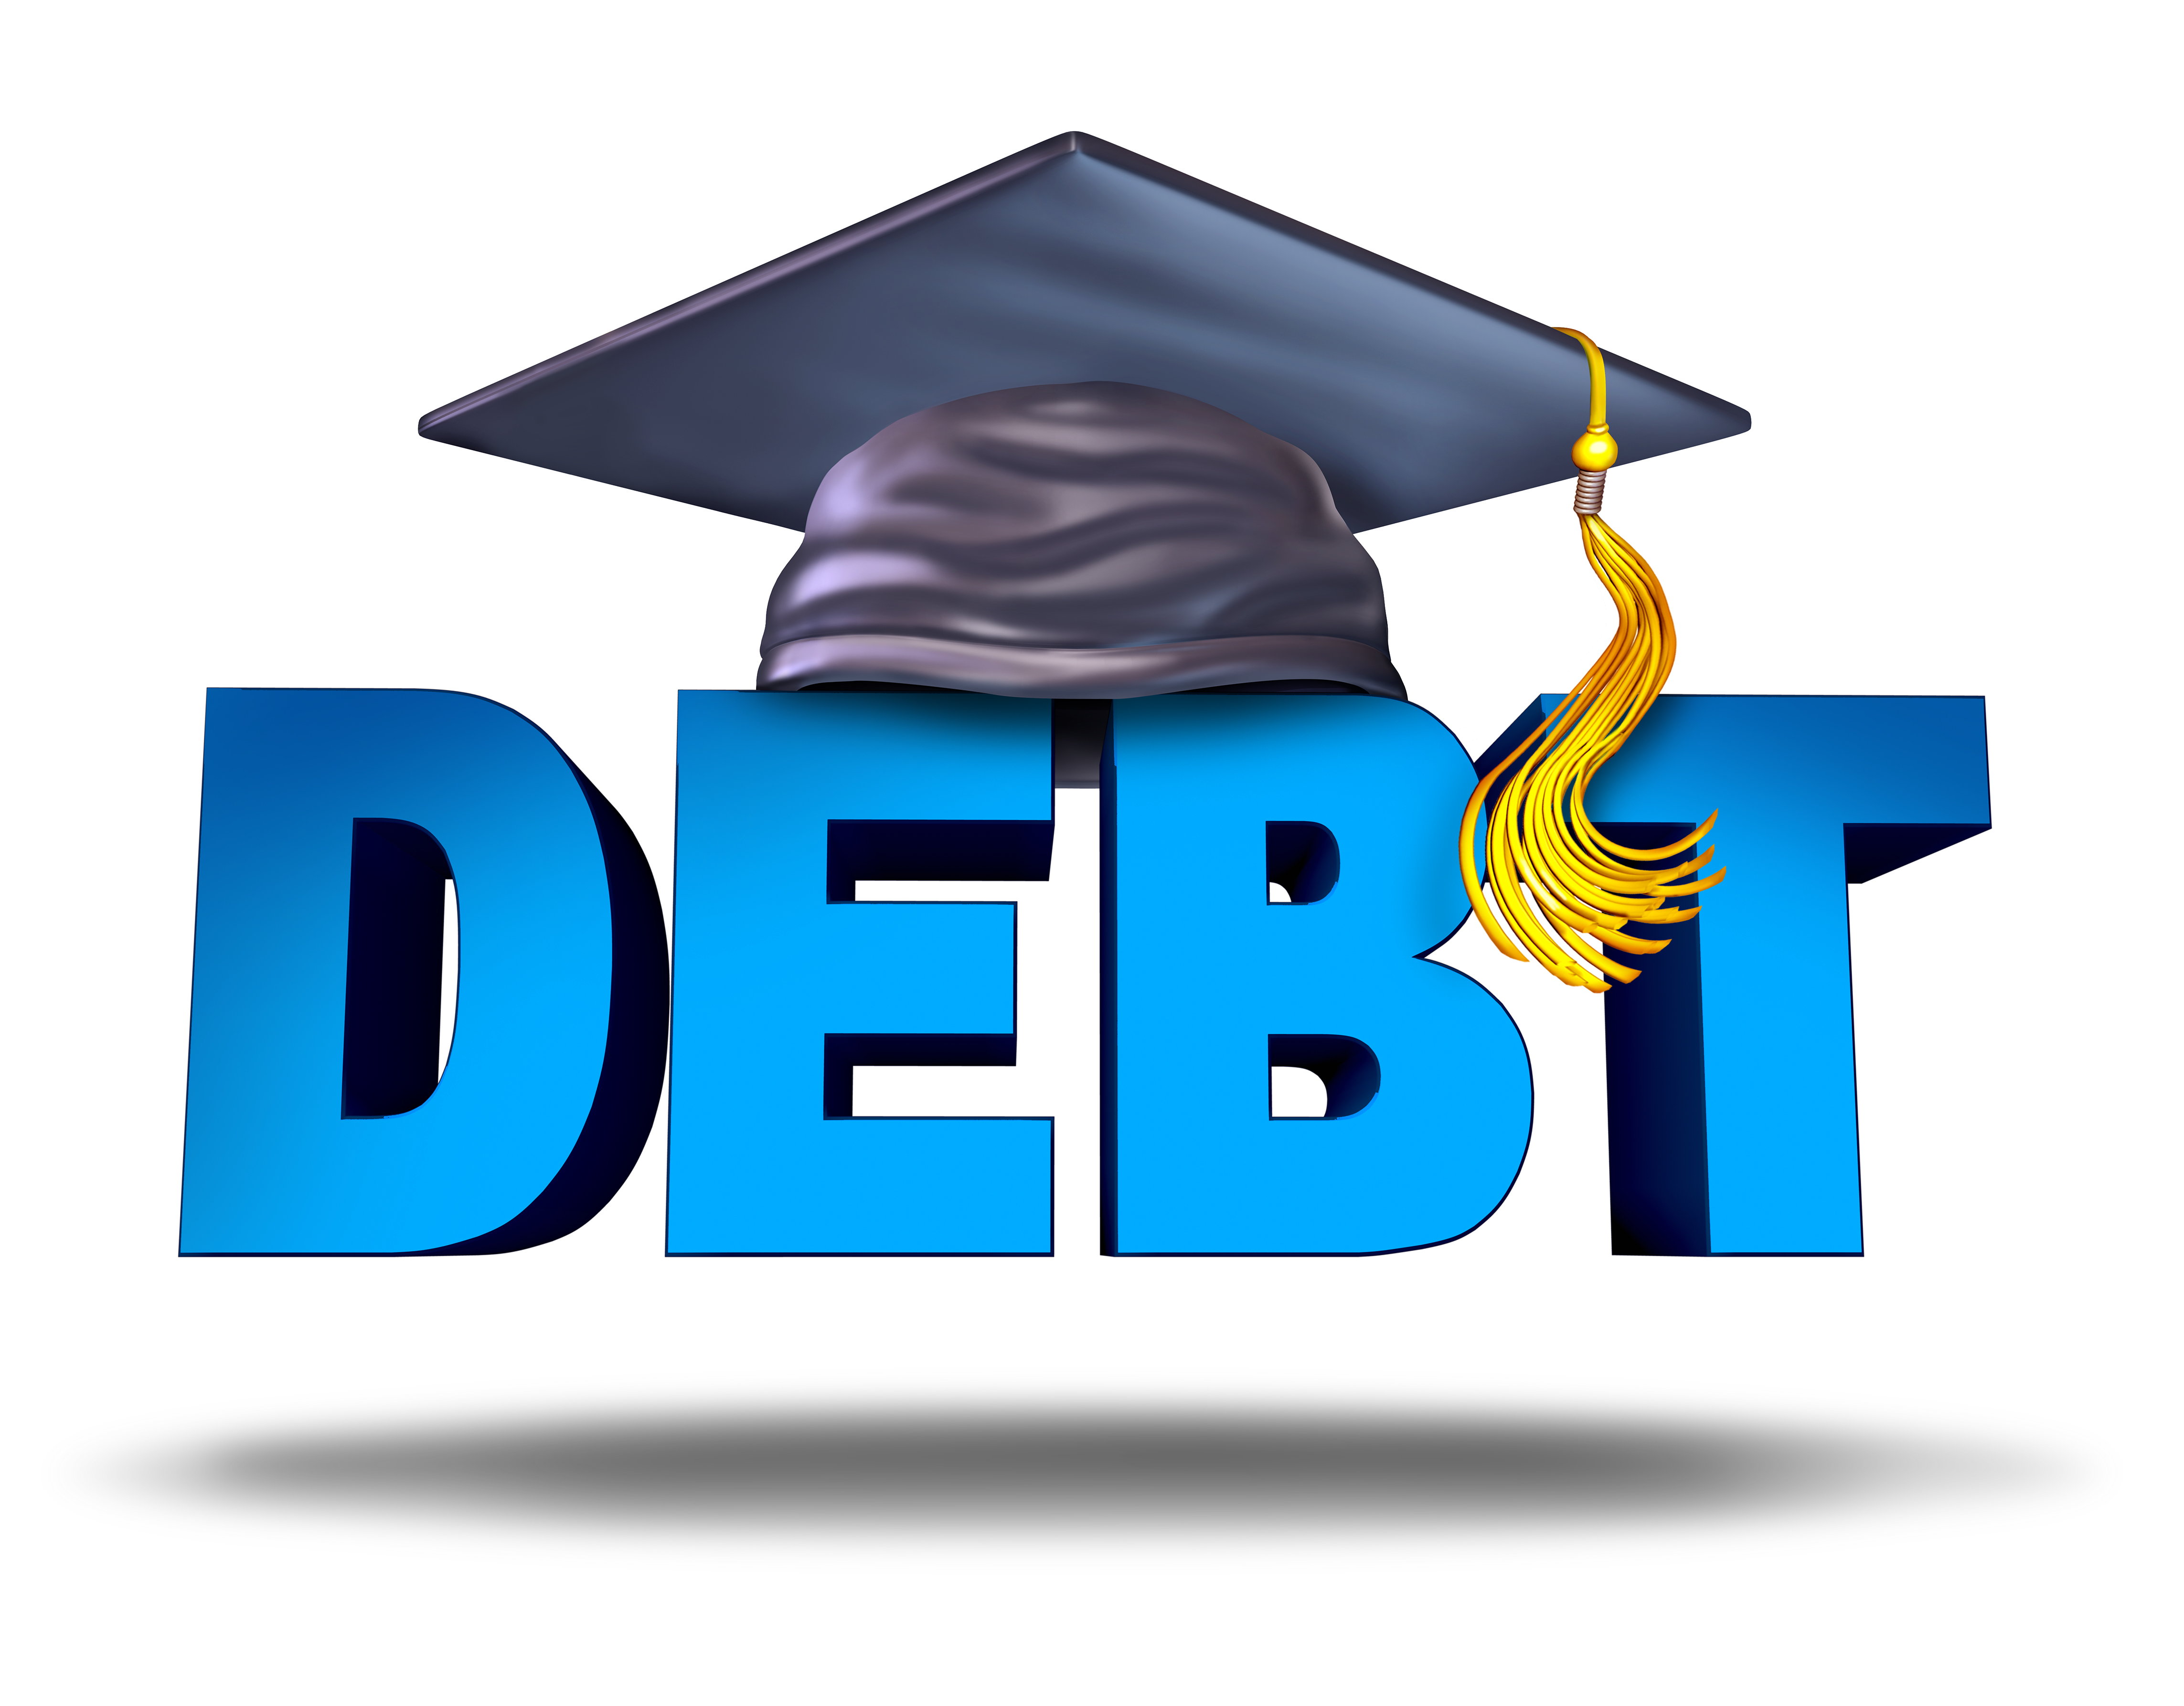 Get Federal Student Debt Relief Document Preperation From NSA Care Call Us Today At 888-350-7549